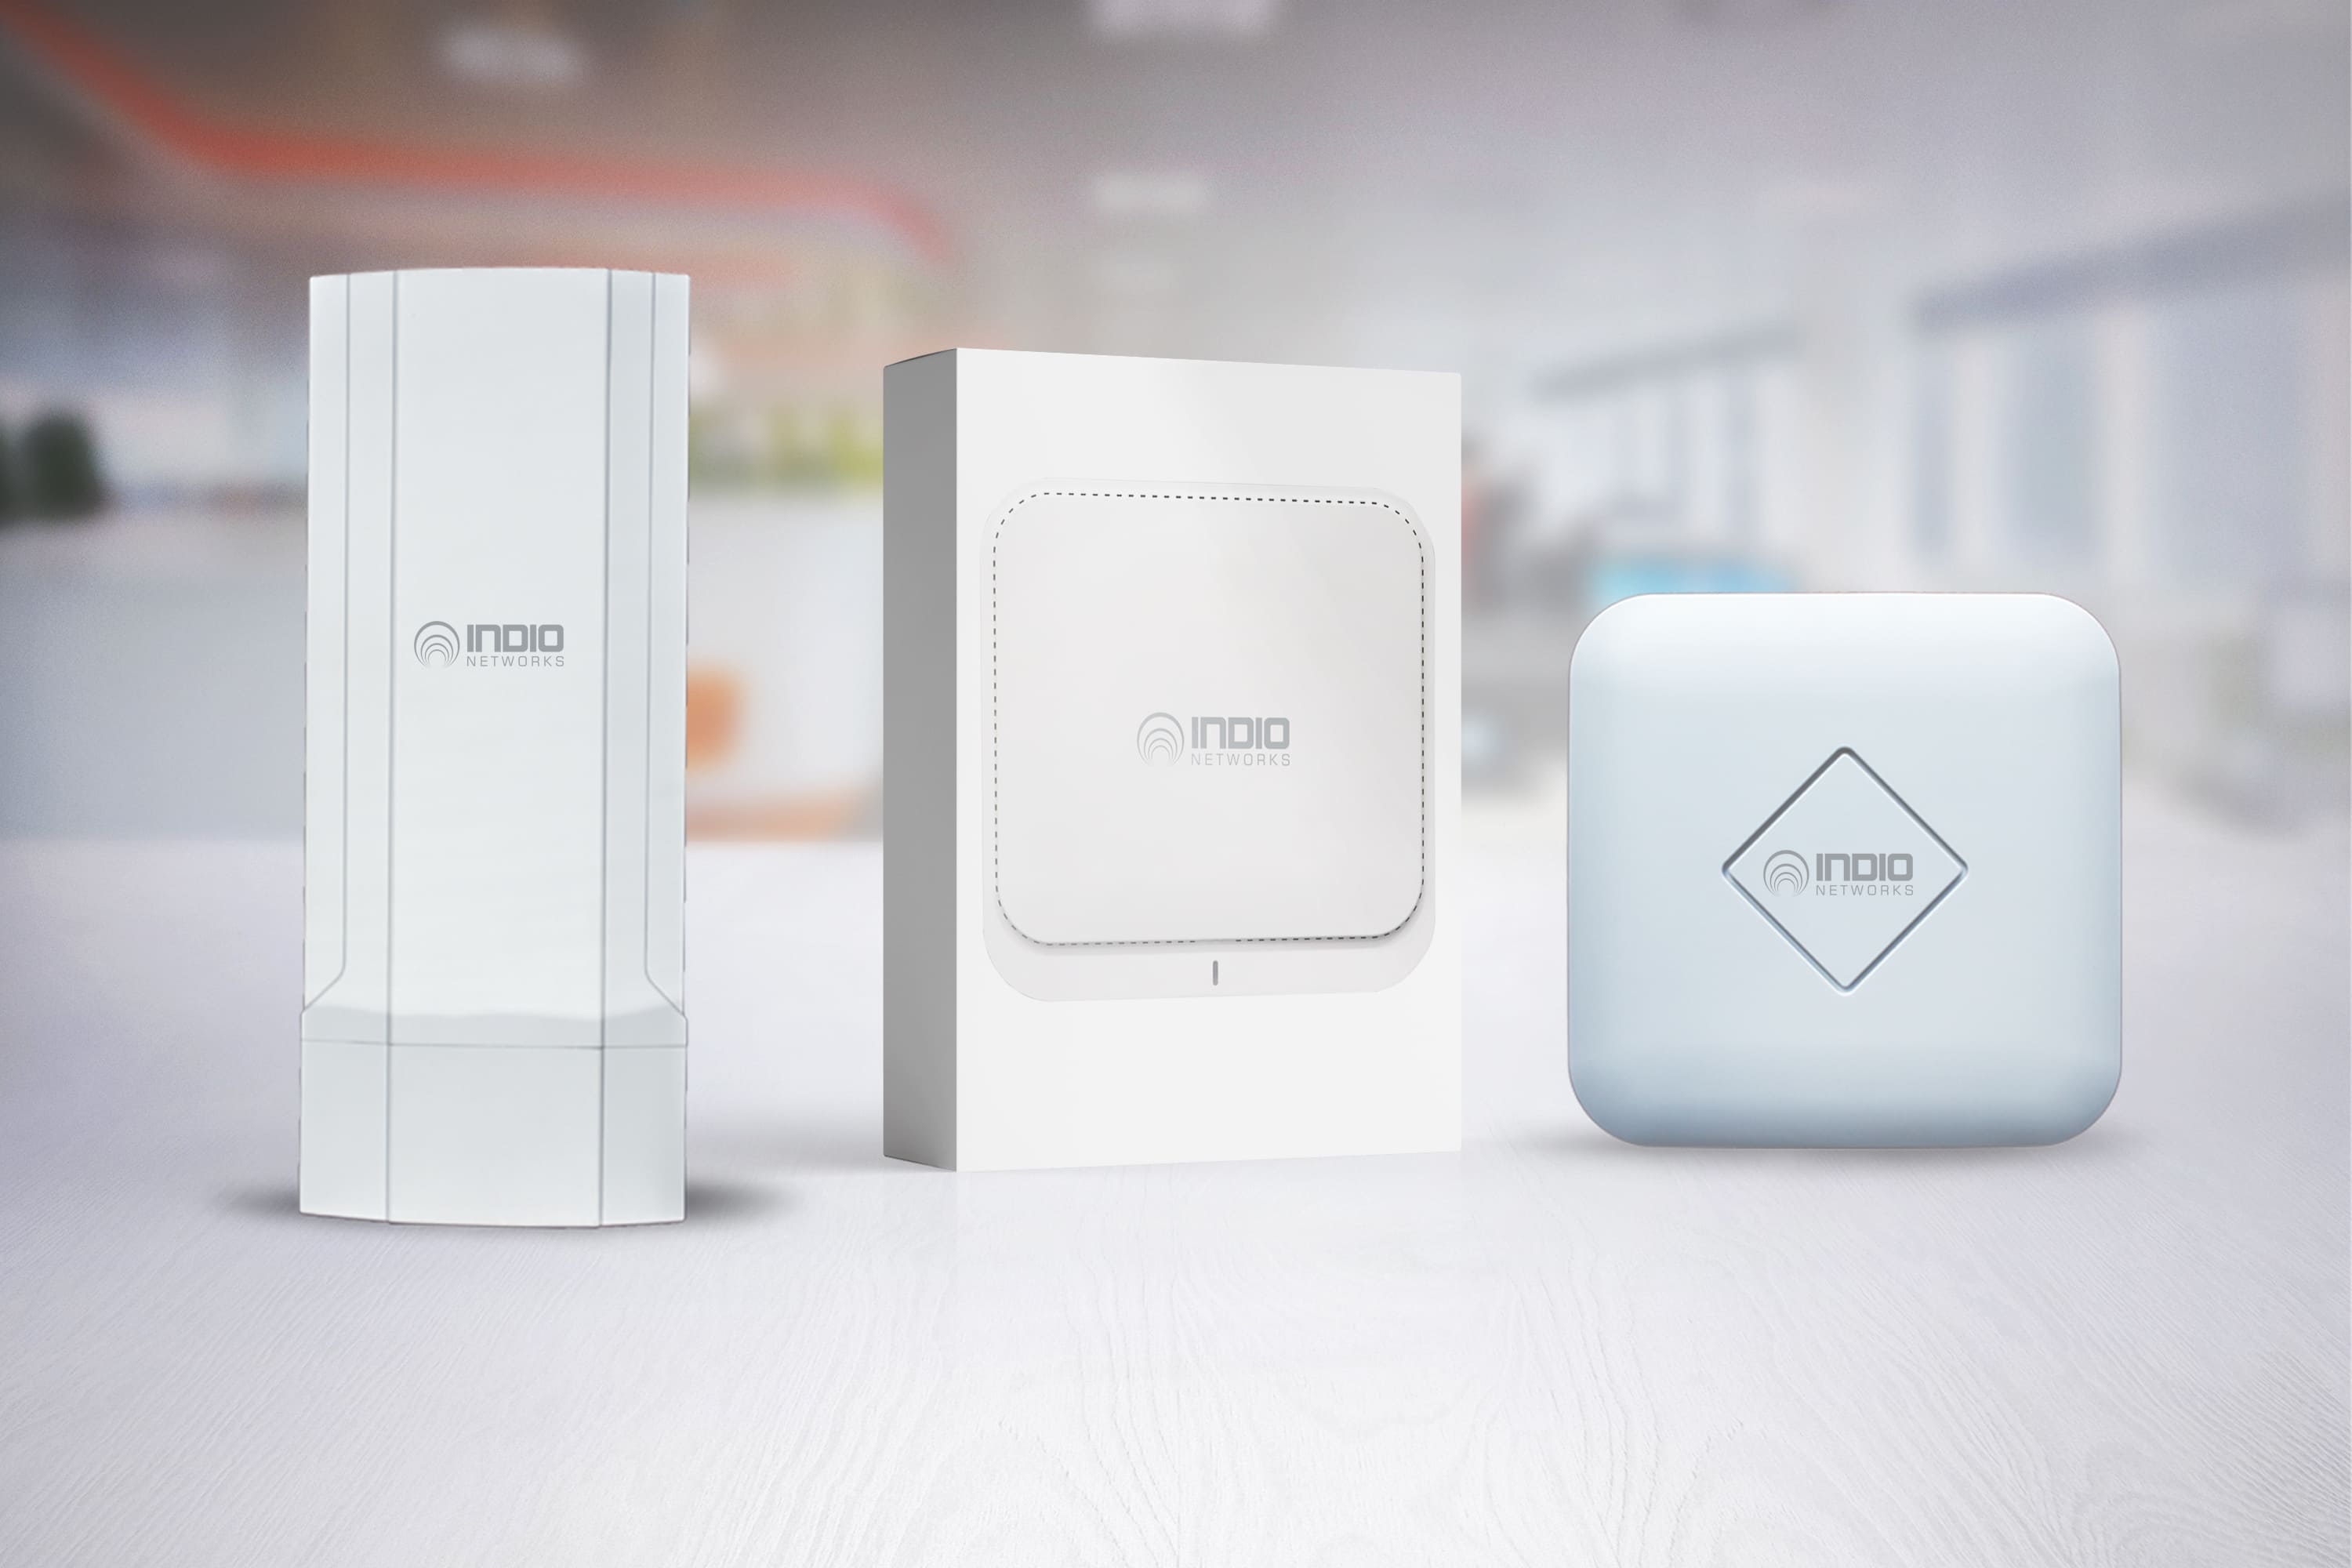 Intelligently designed Access Points - Indio Networks